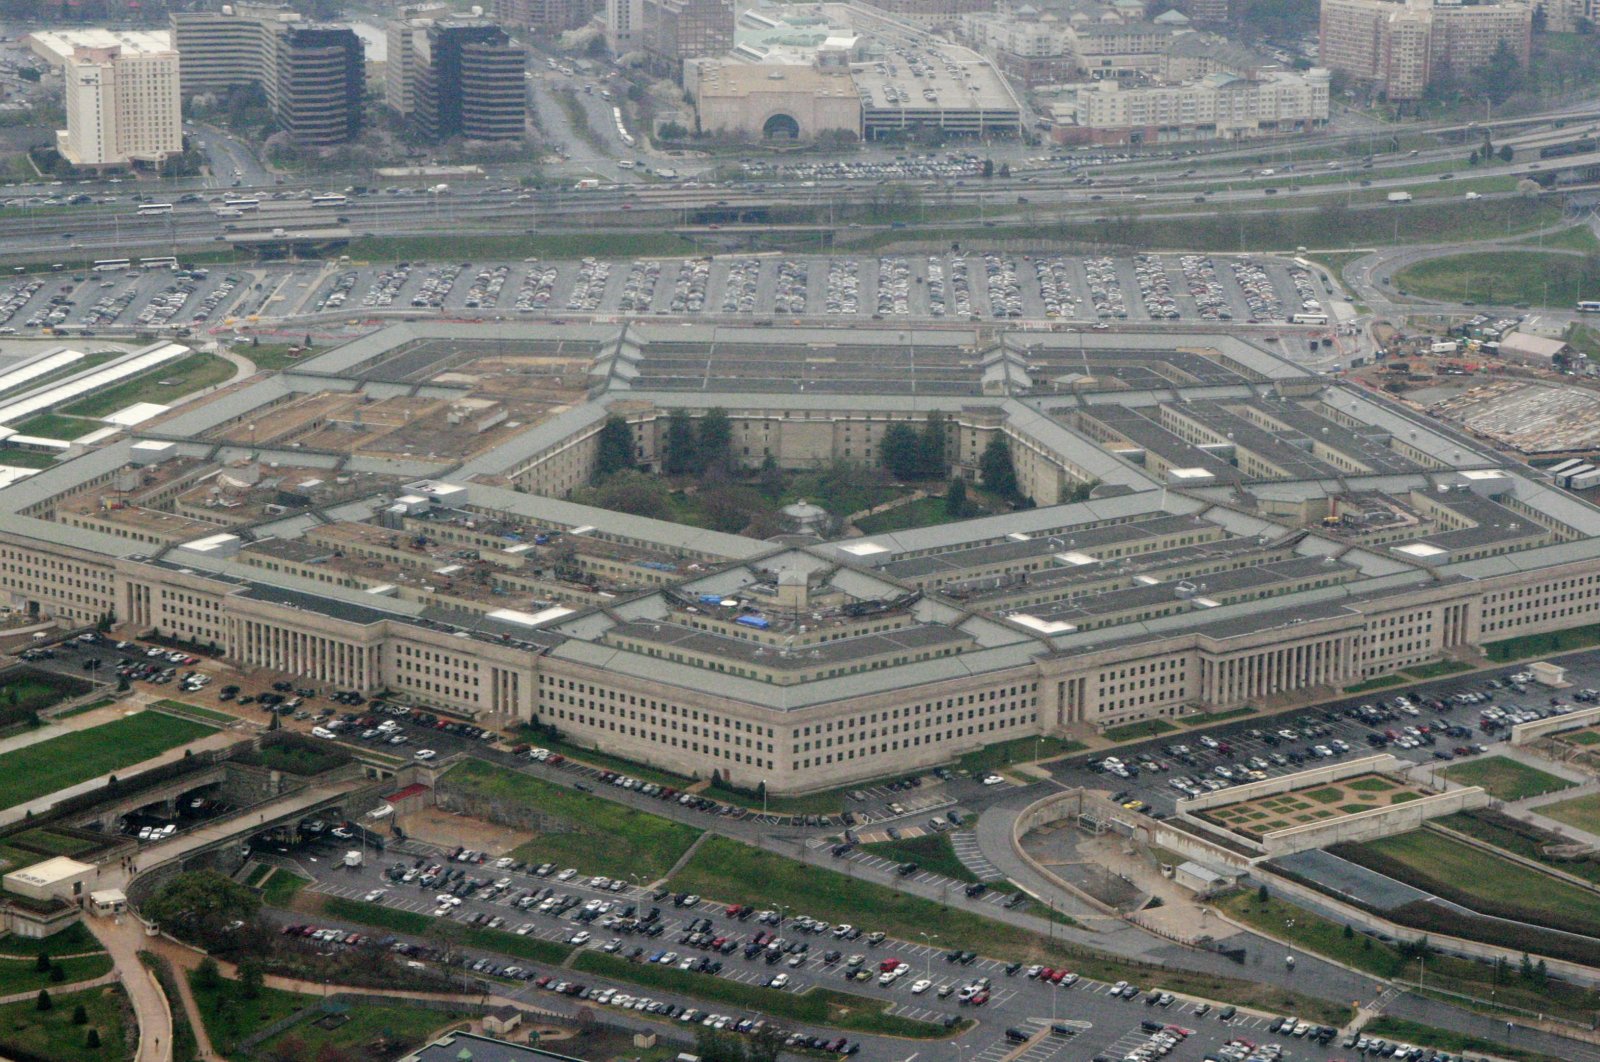 An aerial view of the Pentagon in Washington, D.C., U.S., March 27, 2008. (AP Photo)